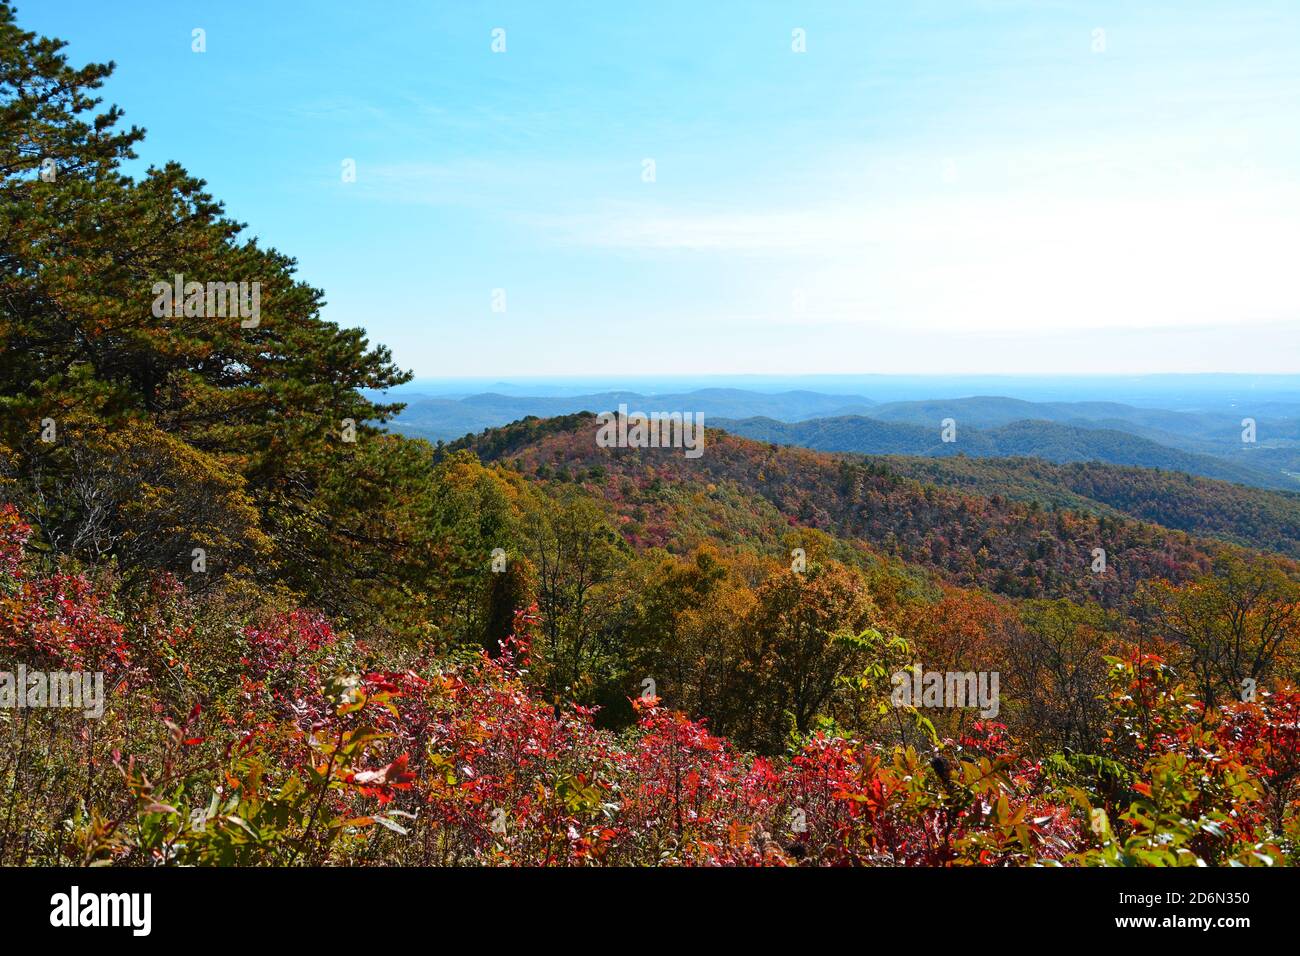 View from an overlook during fall in North Carolina on the Blue Ridge Parkway. Stock Photo